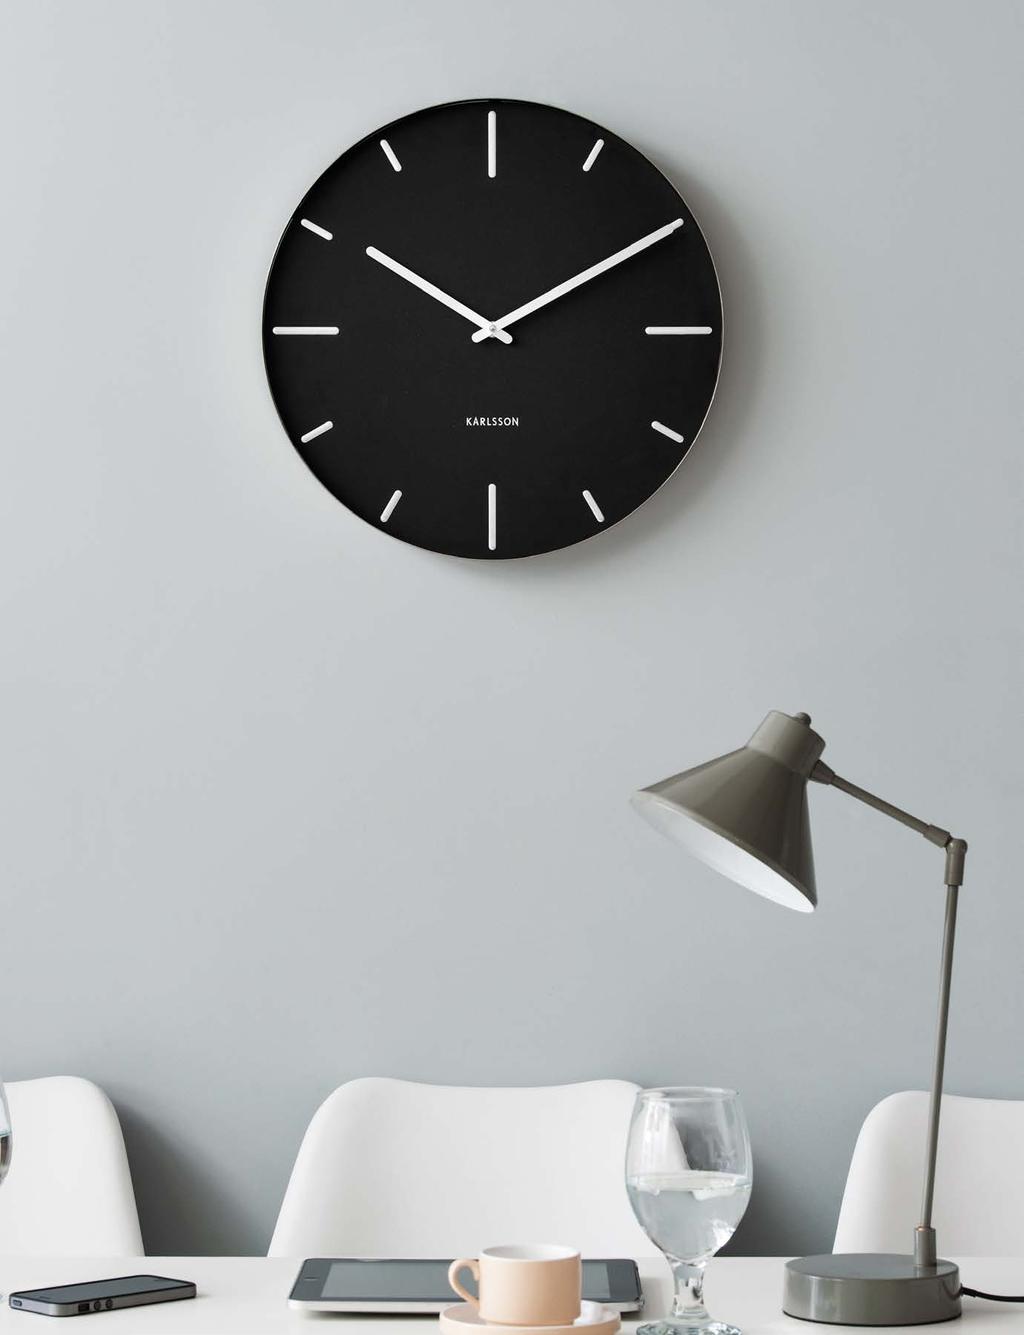 Karlsson is a world-renowned Dutch clock brand. The Karlsson brand is synonymous with high quality, stunning graphics, aesthetic shapes and innovative design.